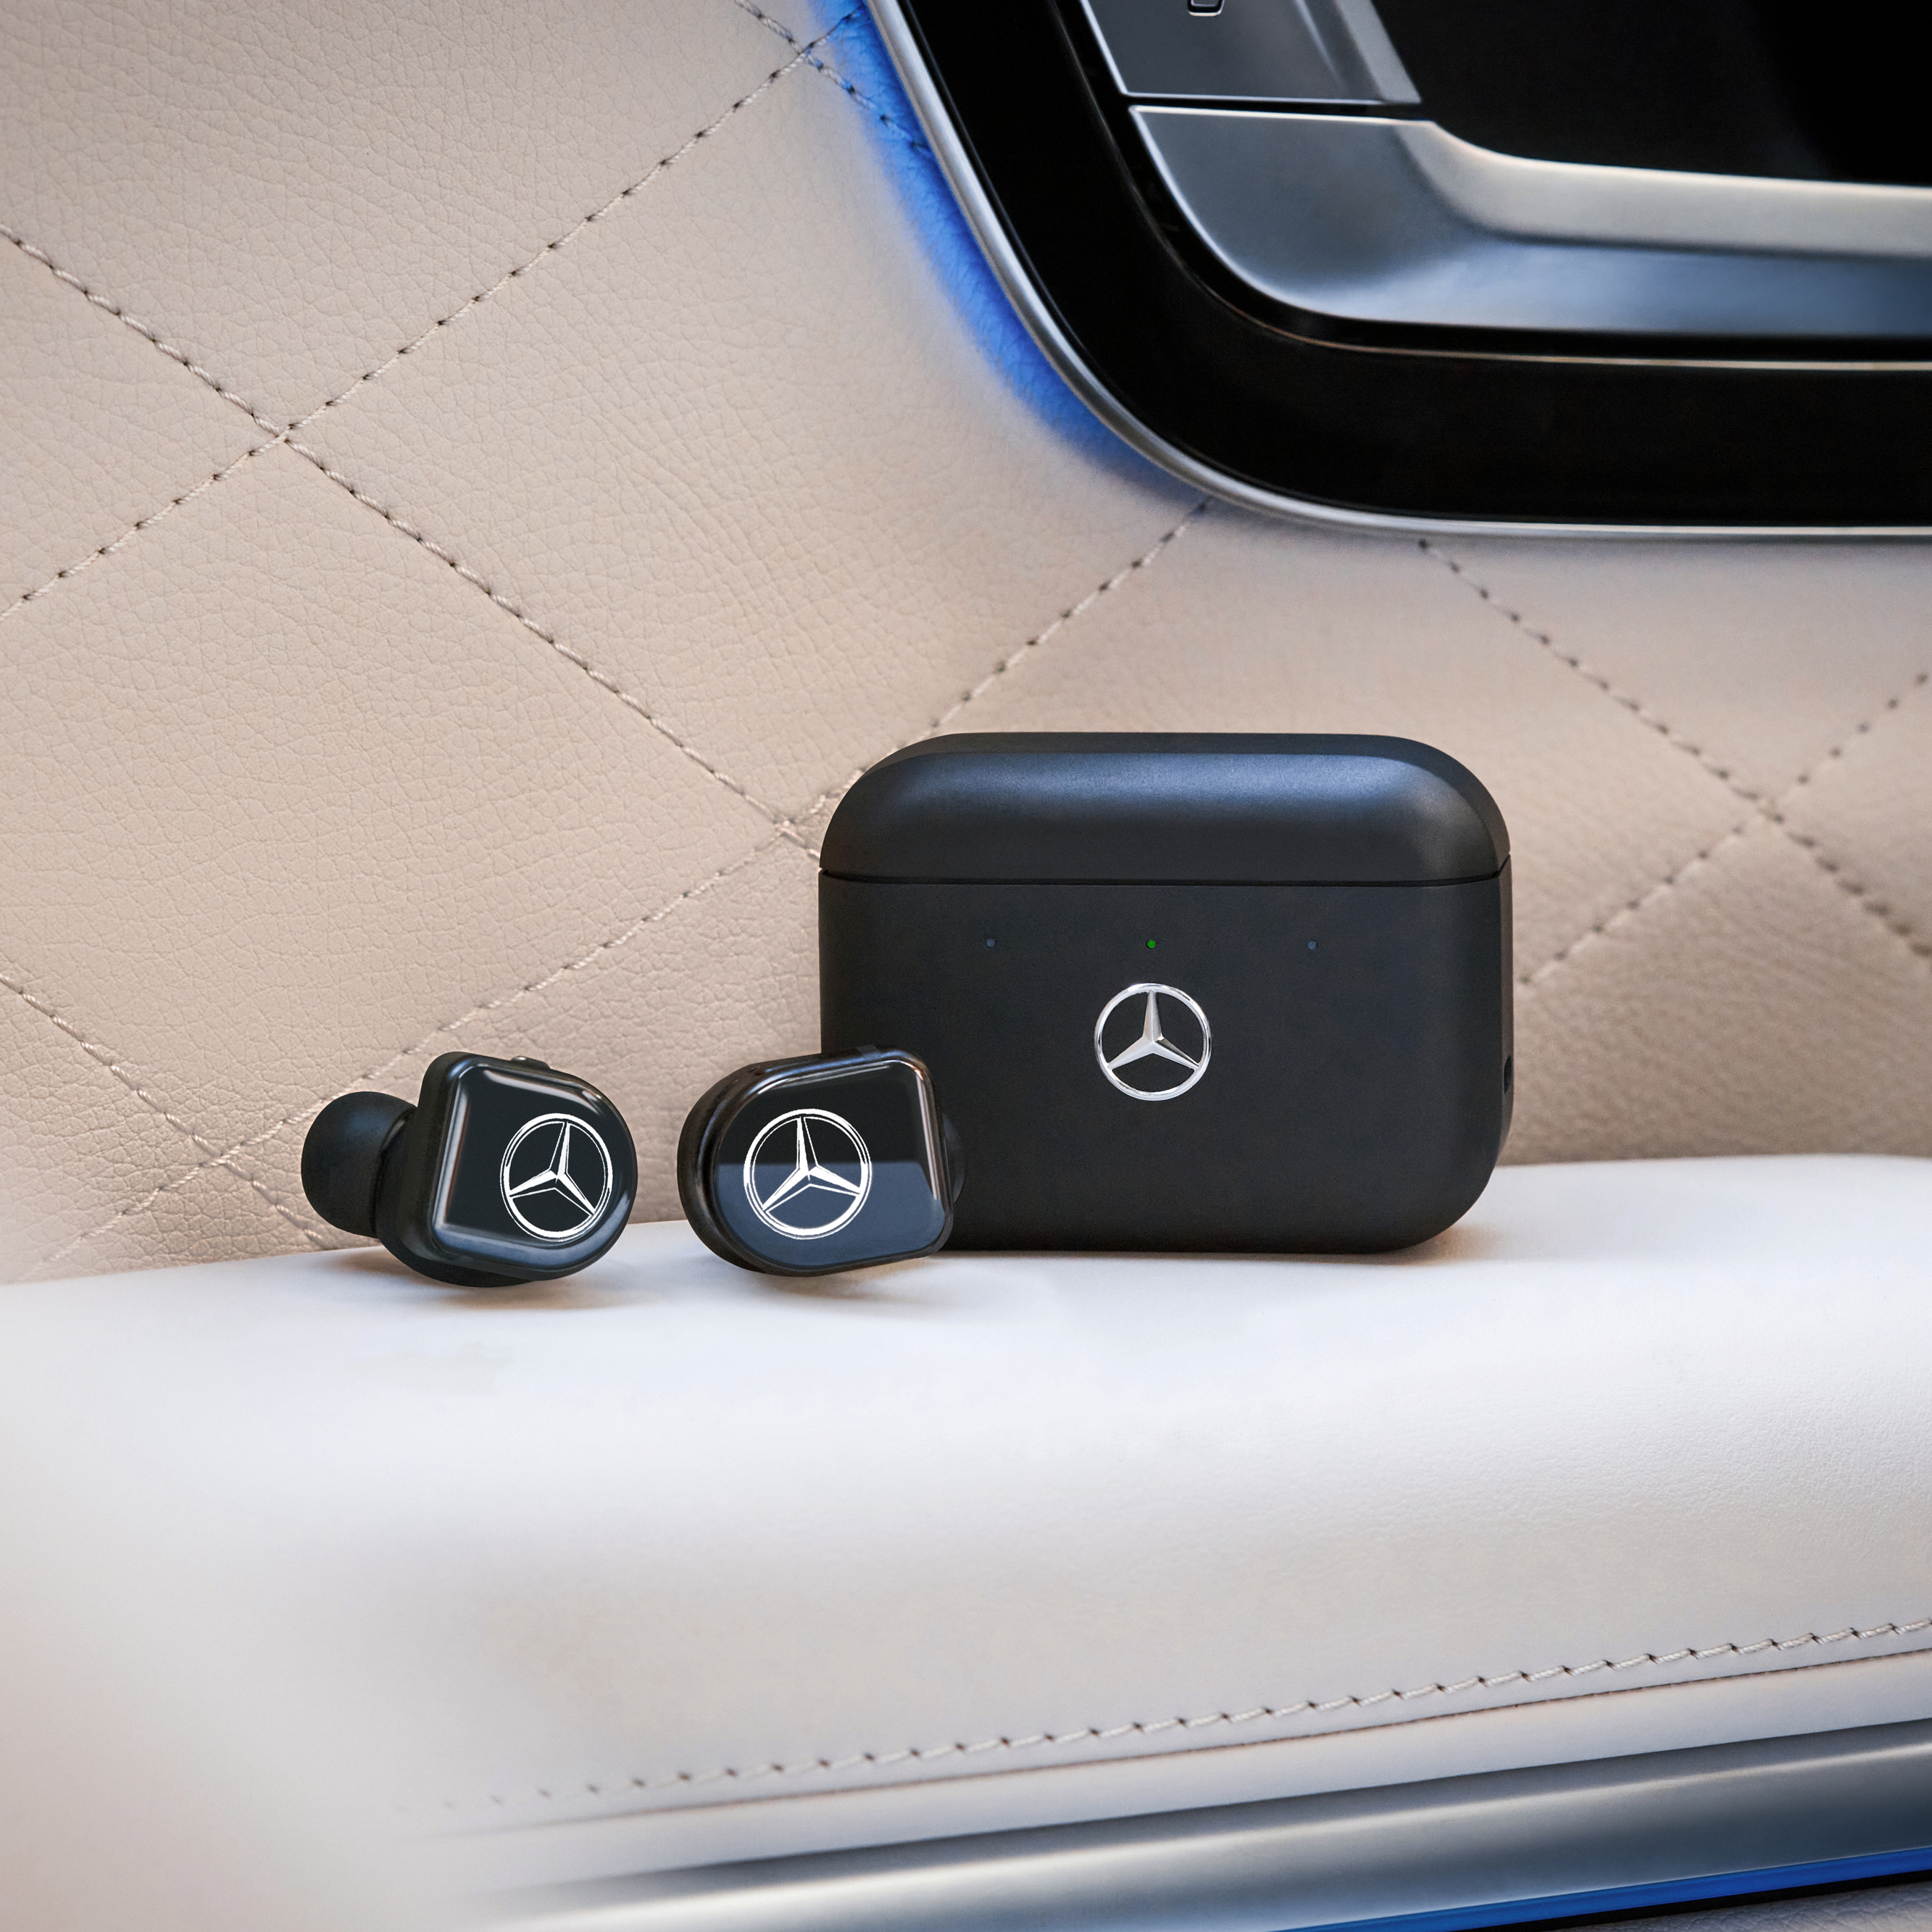 The Master & Dynamic for Mercedes-Benz MW08 True Wireless Earphones